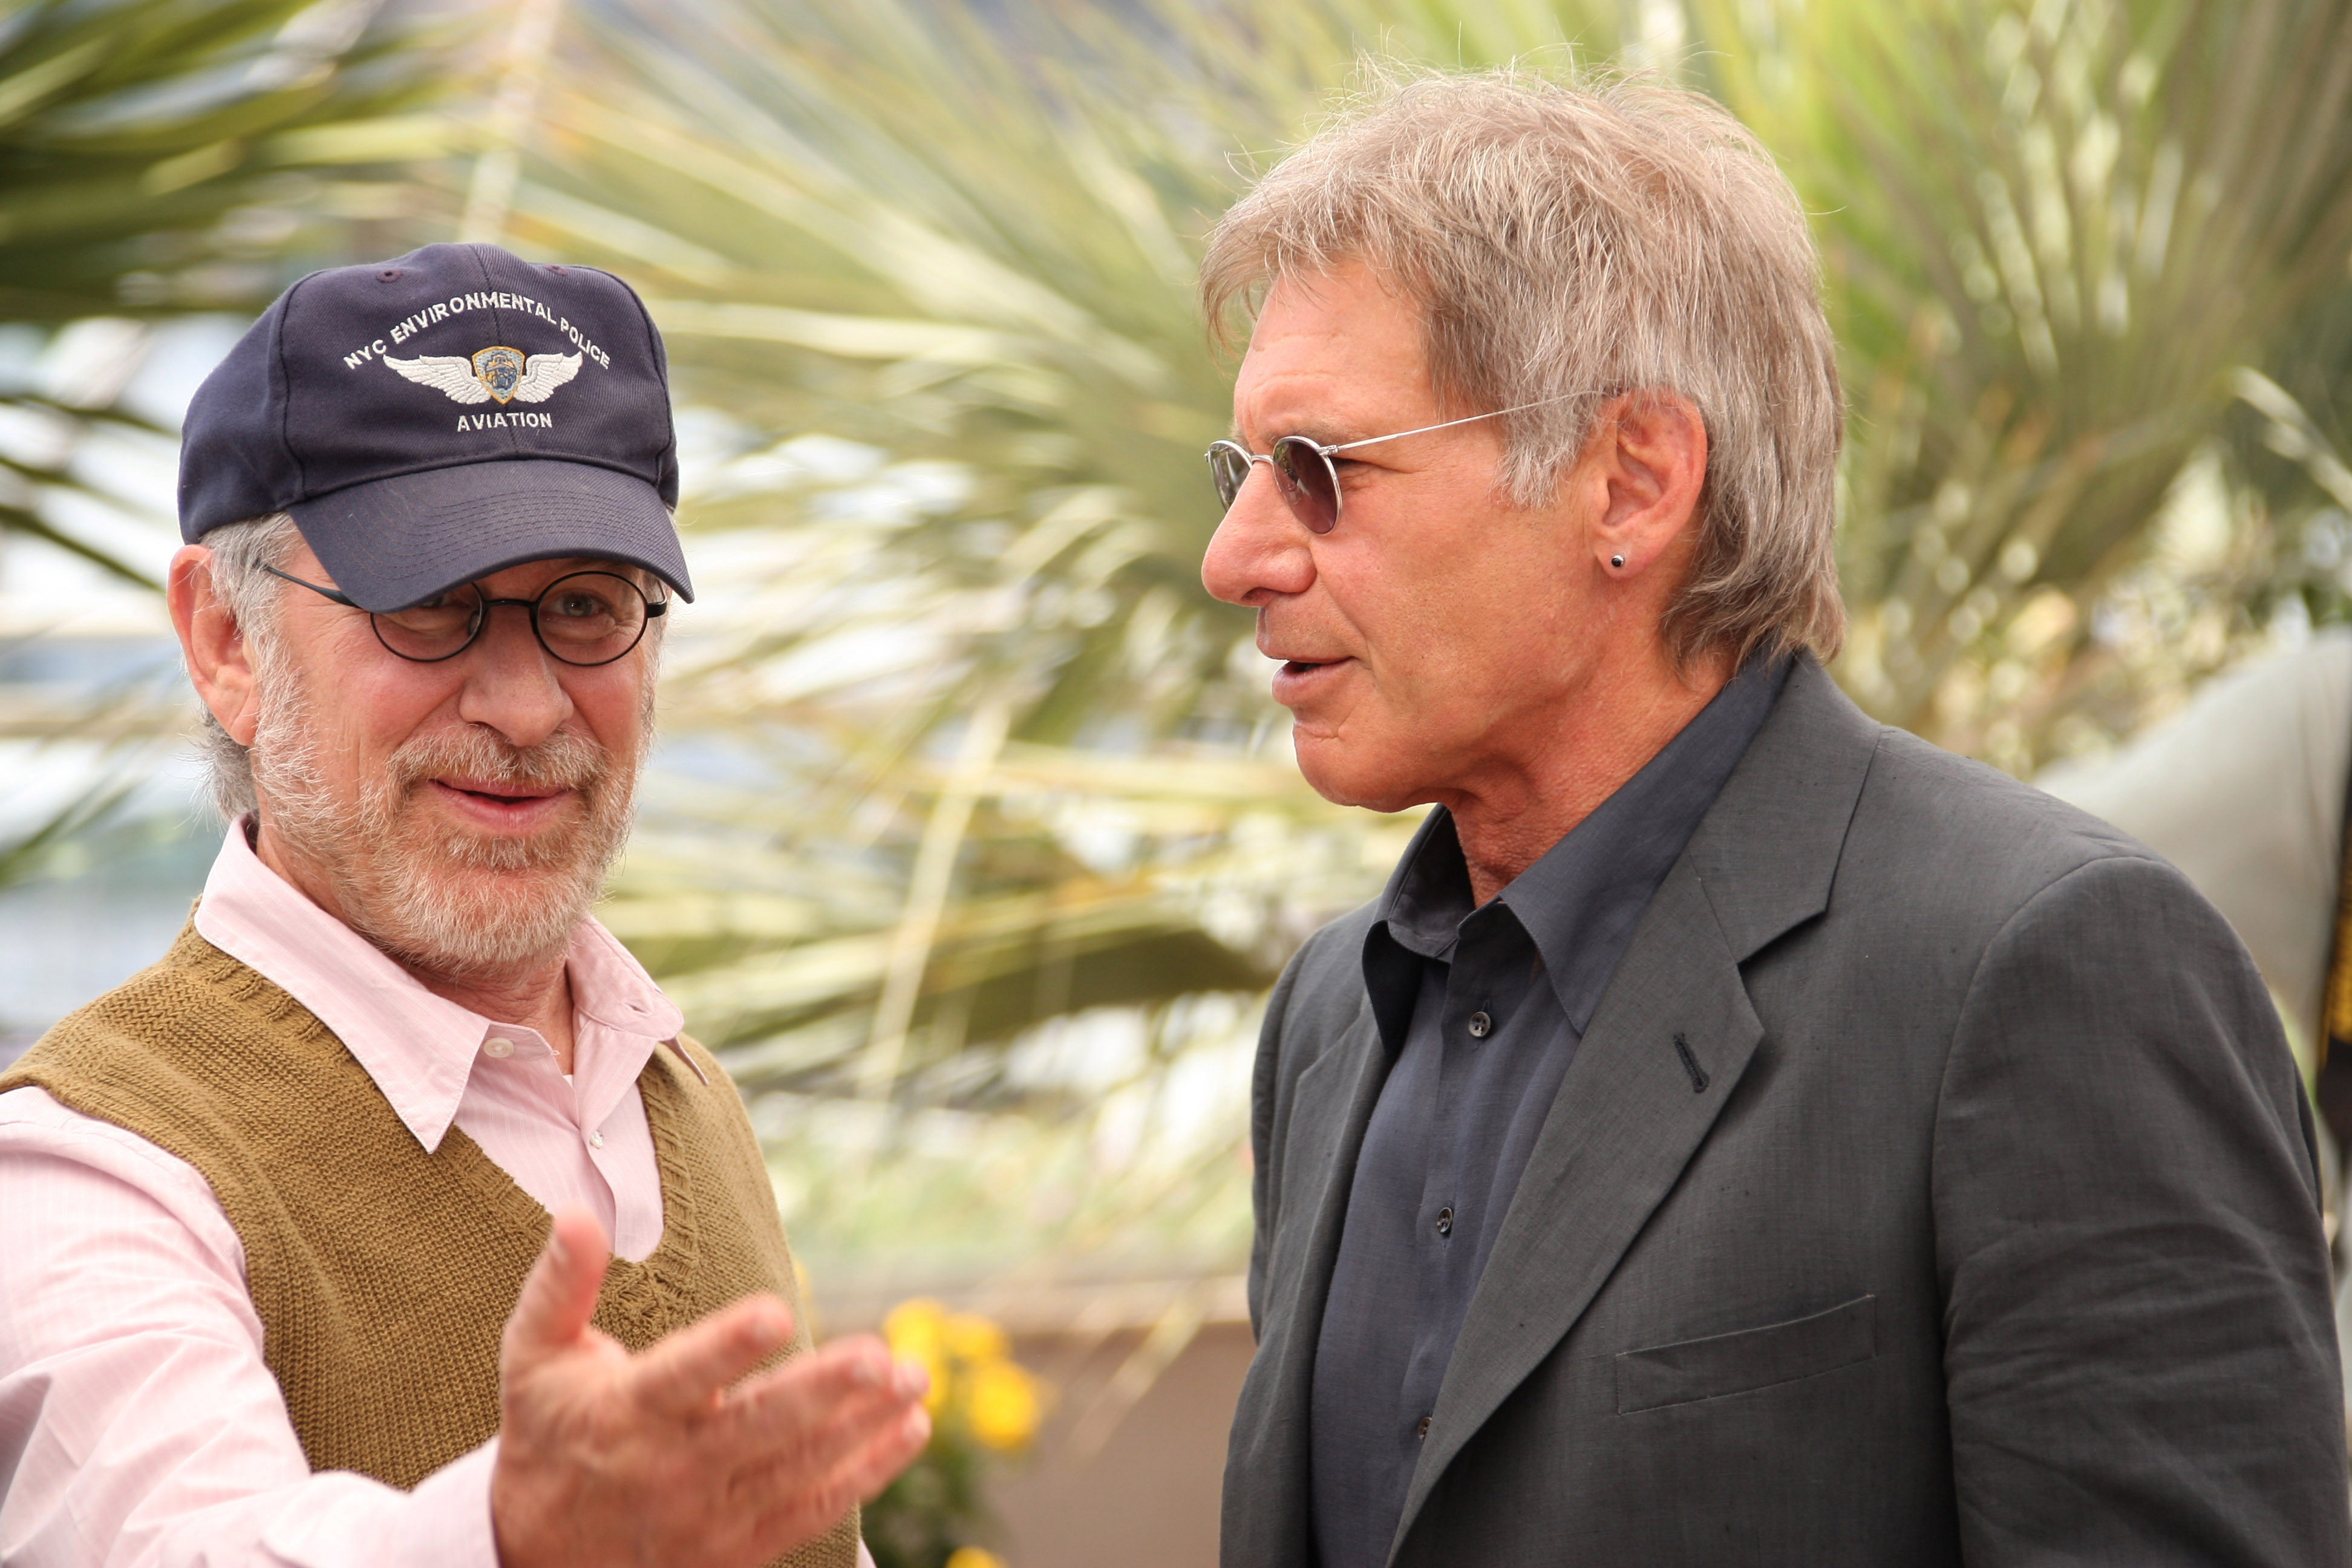 Director Steven Spielberg and Harrison Ford attend the photocall for the movie Indiana Jones and the Kingdom of the Crystal Skull at the 2008 Cannes Film Festival